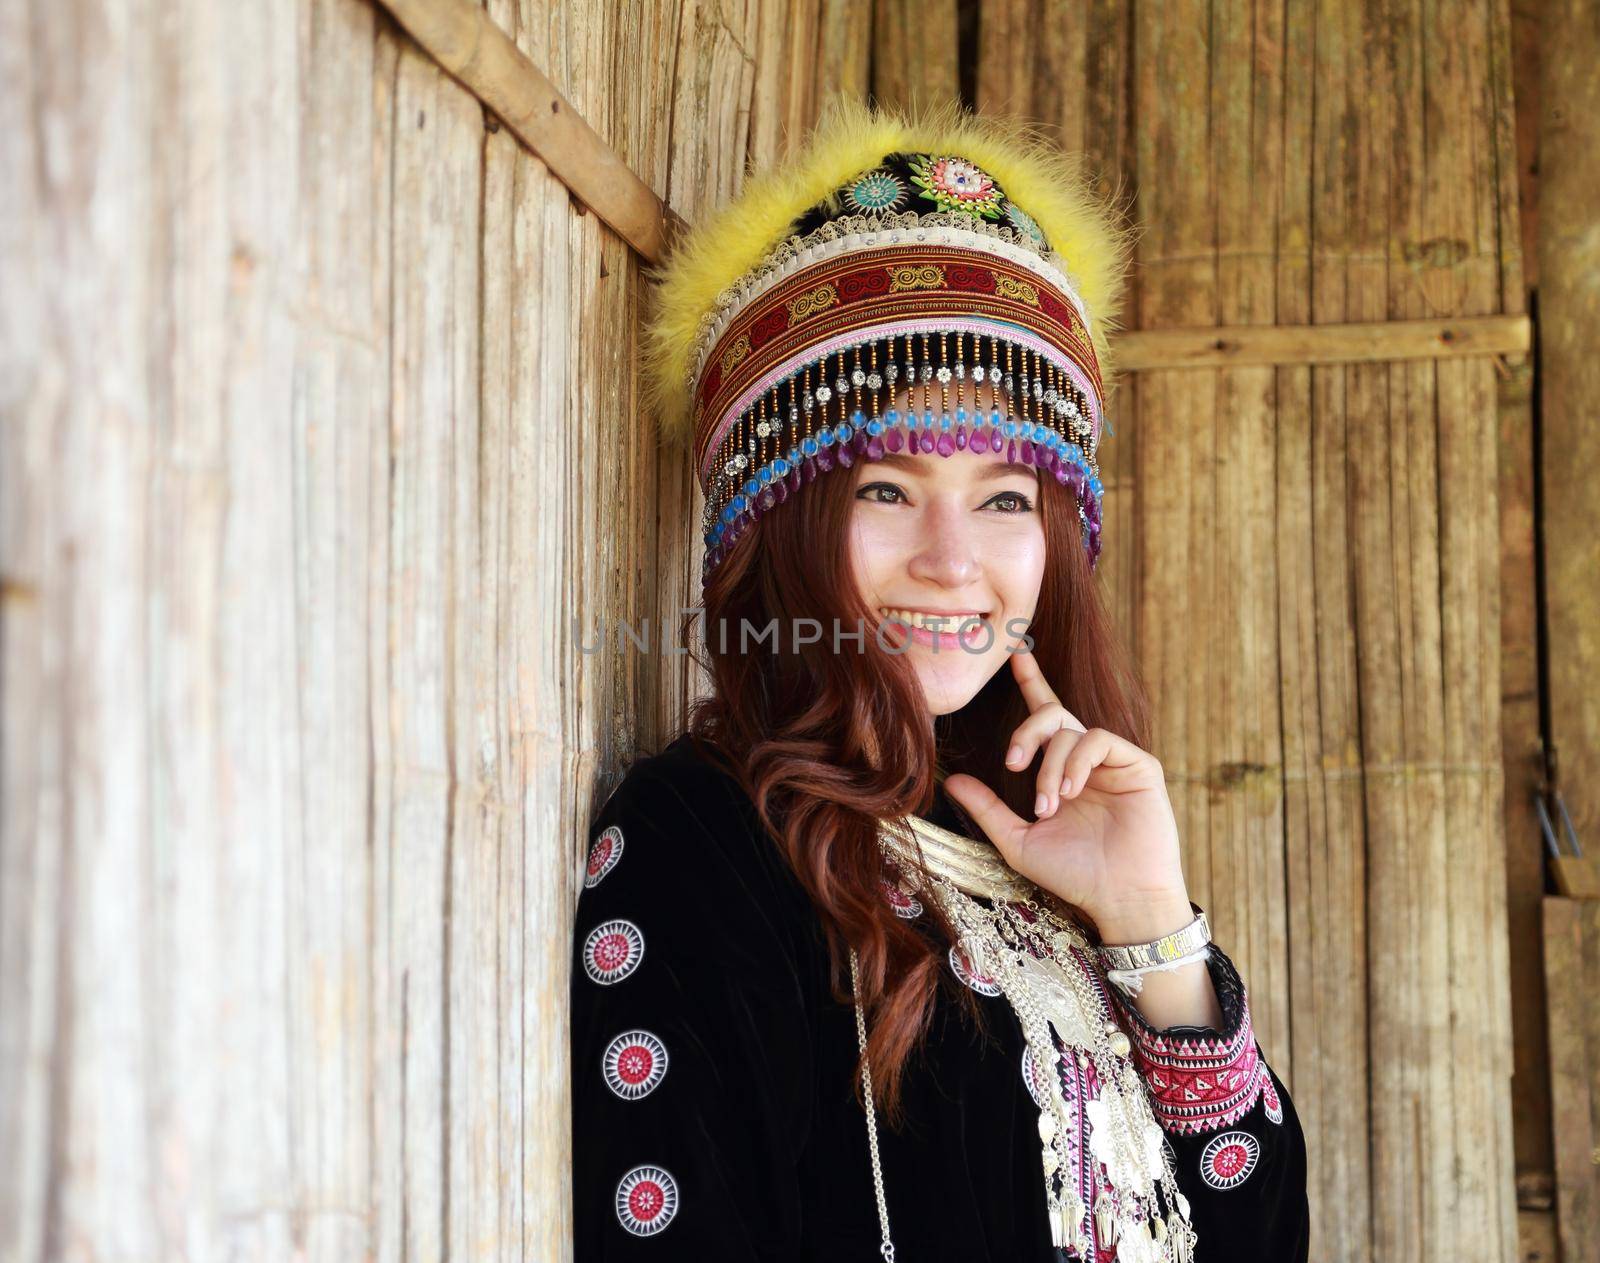 Traditionally dressed Mhong hill tribe woman in the wooden cottage